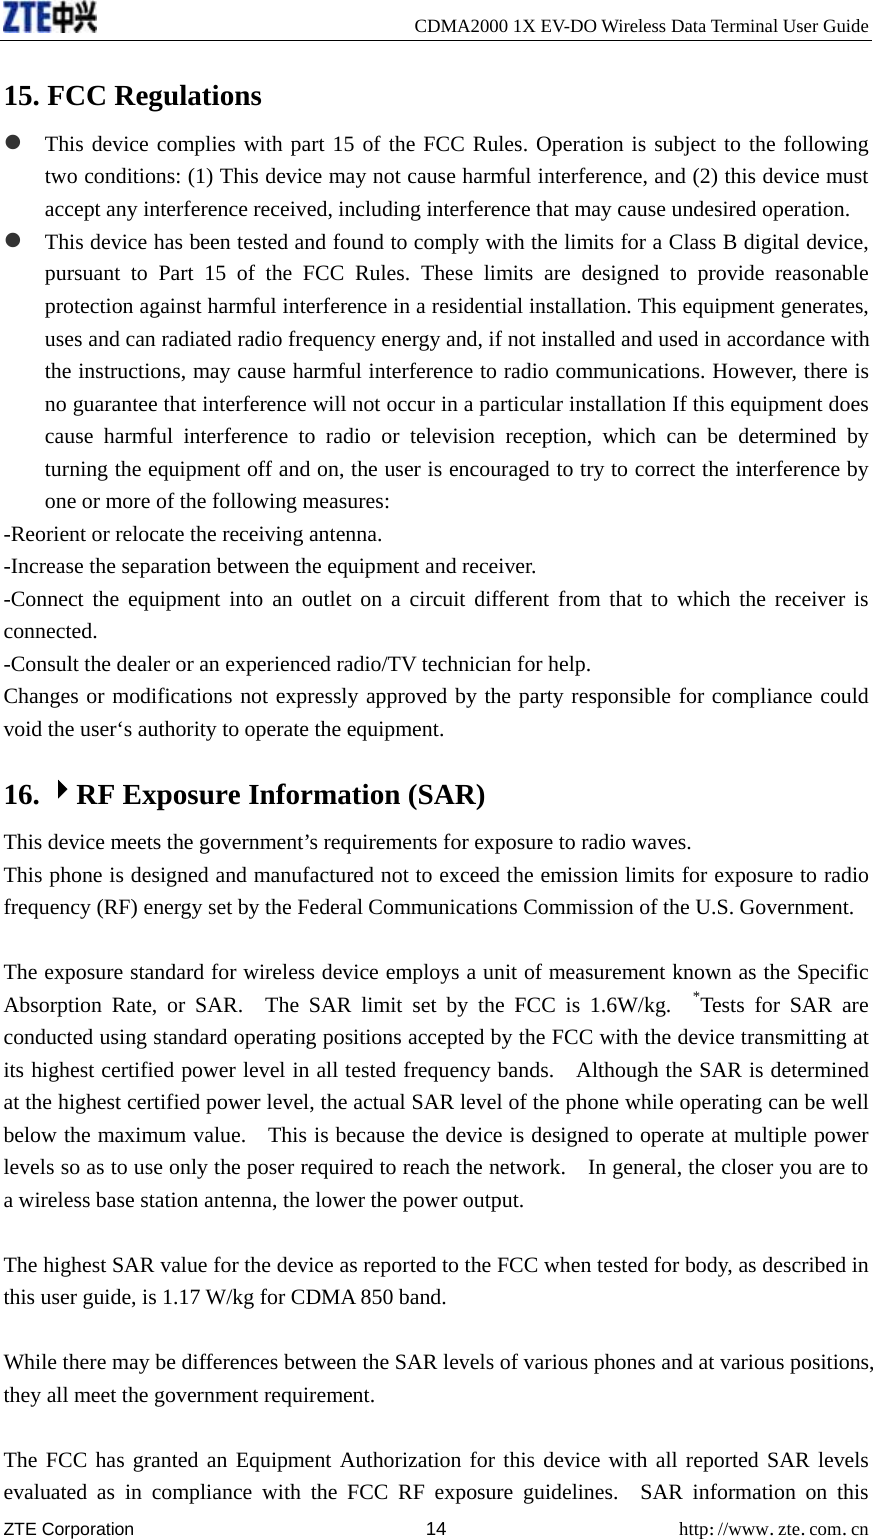     CDMA2000 1X EV-DO Wireless Data Terminal User Guide ZTE Corporation 14 http://www.zte.com.cn  15. FCC Regulations z This device complies with part 15 of the FCC Rules. Operation is subject to the following two conditions: (1) This device may not cause harmful interference, and (2) this device must accept any interference received, including interference that may cause undesired operation. z This device has been tested and found to comply with the limits for a Class B digital device, pursuant to Part 15 of the FCC Rules. These limits are designed to provide reasonable protection against harmful interference in a residential installation. This equipment generates, uses and can radiated radio frequency energy and, if not installed and used in accordance with the instructions, may cause harmful interference to radio communications. However, there is no guarantee that interference will not occur in a particular installation If this equipment does cause harmful interference to radio or television reception, which can be determined by turning the equipment off and on, the user is encouraged to try to correct the interference by one or more of the following measures: -Reorient or relocate the receiving antenna. -Increase the separation between the equipment and receiver. -Connect the equipment into an outlet on a circuit different from that to which the receiver is connected. -Consult the dealer or an experienced radio/TV technician for help. Changes or modifications not expressly approved by the party responsible for compliance could void the user‘s authority to operate the equipment. 16. 4RF Exposure Information (SAR)   This device meets the government’s requirements for exposure to radio waves. This phone is designed and manufactured not to exceed the emission limits for exposure to radio frequency (RF) energy set by the Federal Communications Commission of the U.S. Government.      The exposure standard for wireless device employs a unit of measurement known as the Specific Absorption Rate, or SAR.  The SAR limit set by the FCC is 1.6W/kg.  *Tests for SAR are conducted using standard operating positions accepted by the FCC with the device transmitting at its highest certified power level in all tested frequency bands.    Although the SAR is determined at the highest certified power level, the actual SAR level of the phone while operating can be well below the maximum value.    This is because the device is designed to operate at multiple power levels so as to use only the poser required to reach the network.    In general, the closer you are to a wireless base station antenna, the lower the power output.  The highest SAR value for the device as reported to the FCC when tested for body, as described in this user guide, is 1.17 W/kg for CDMA 850 band.  While there may be differences between the SAR levels of various phones and at various positions, they all meet the government requirement.  The FCC has granted an Equipment Authorization for this device with all reported SAR levels evaluated as in compliance with the FCC RF exposure guidelines.  SAR information on this 